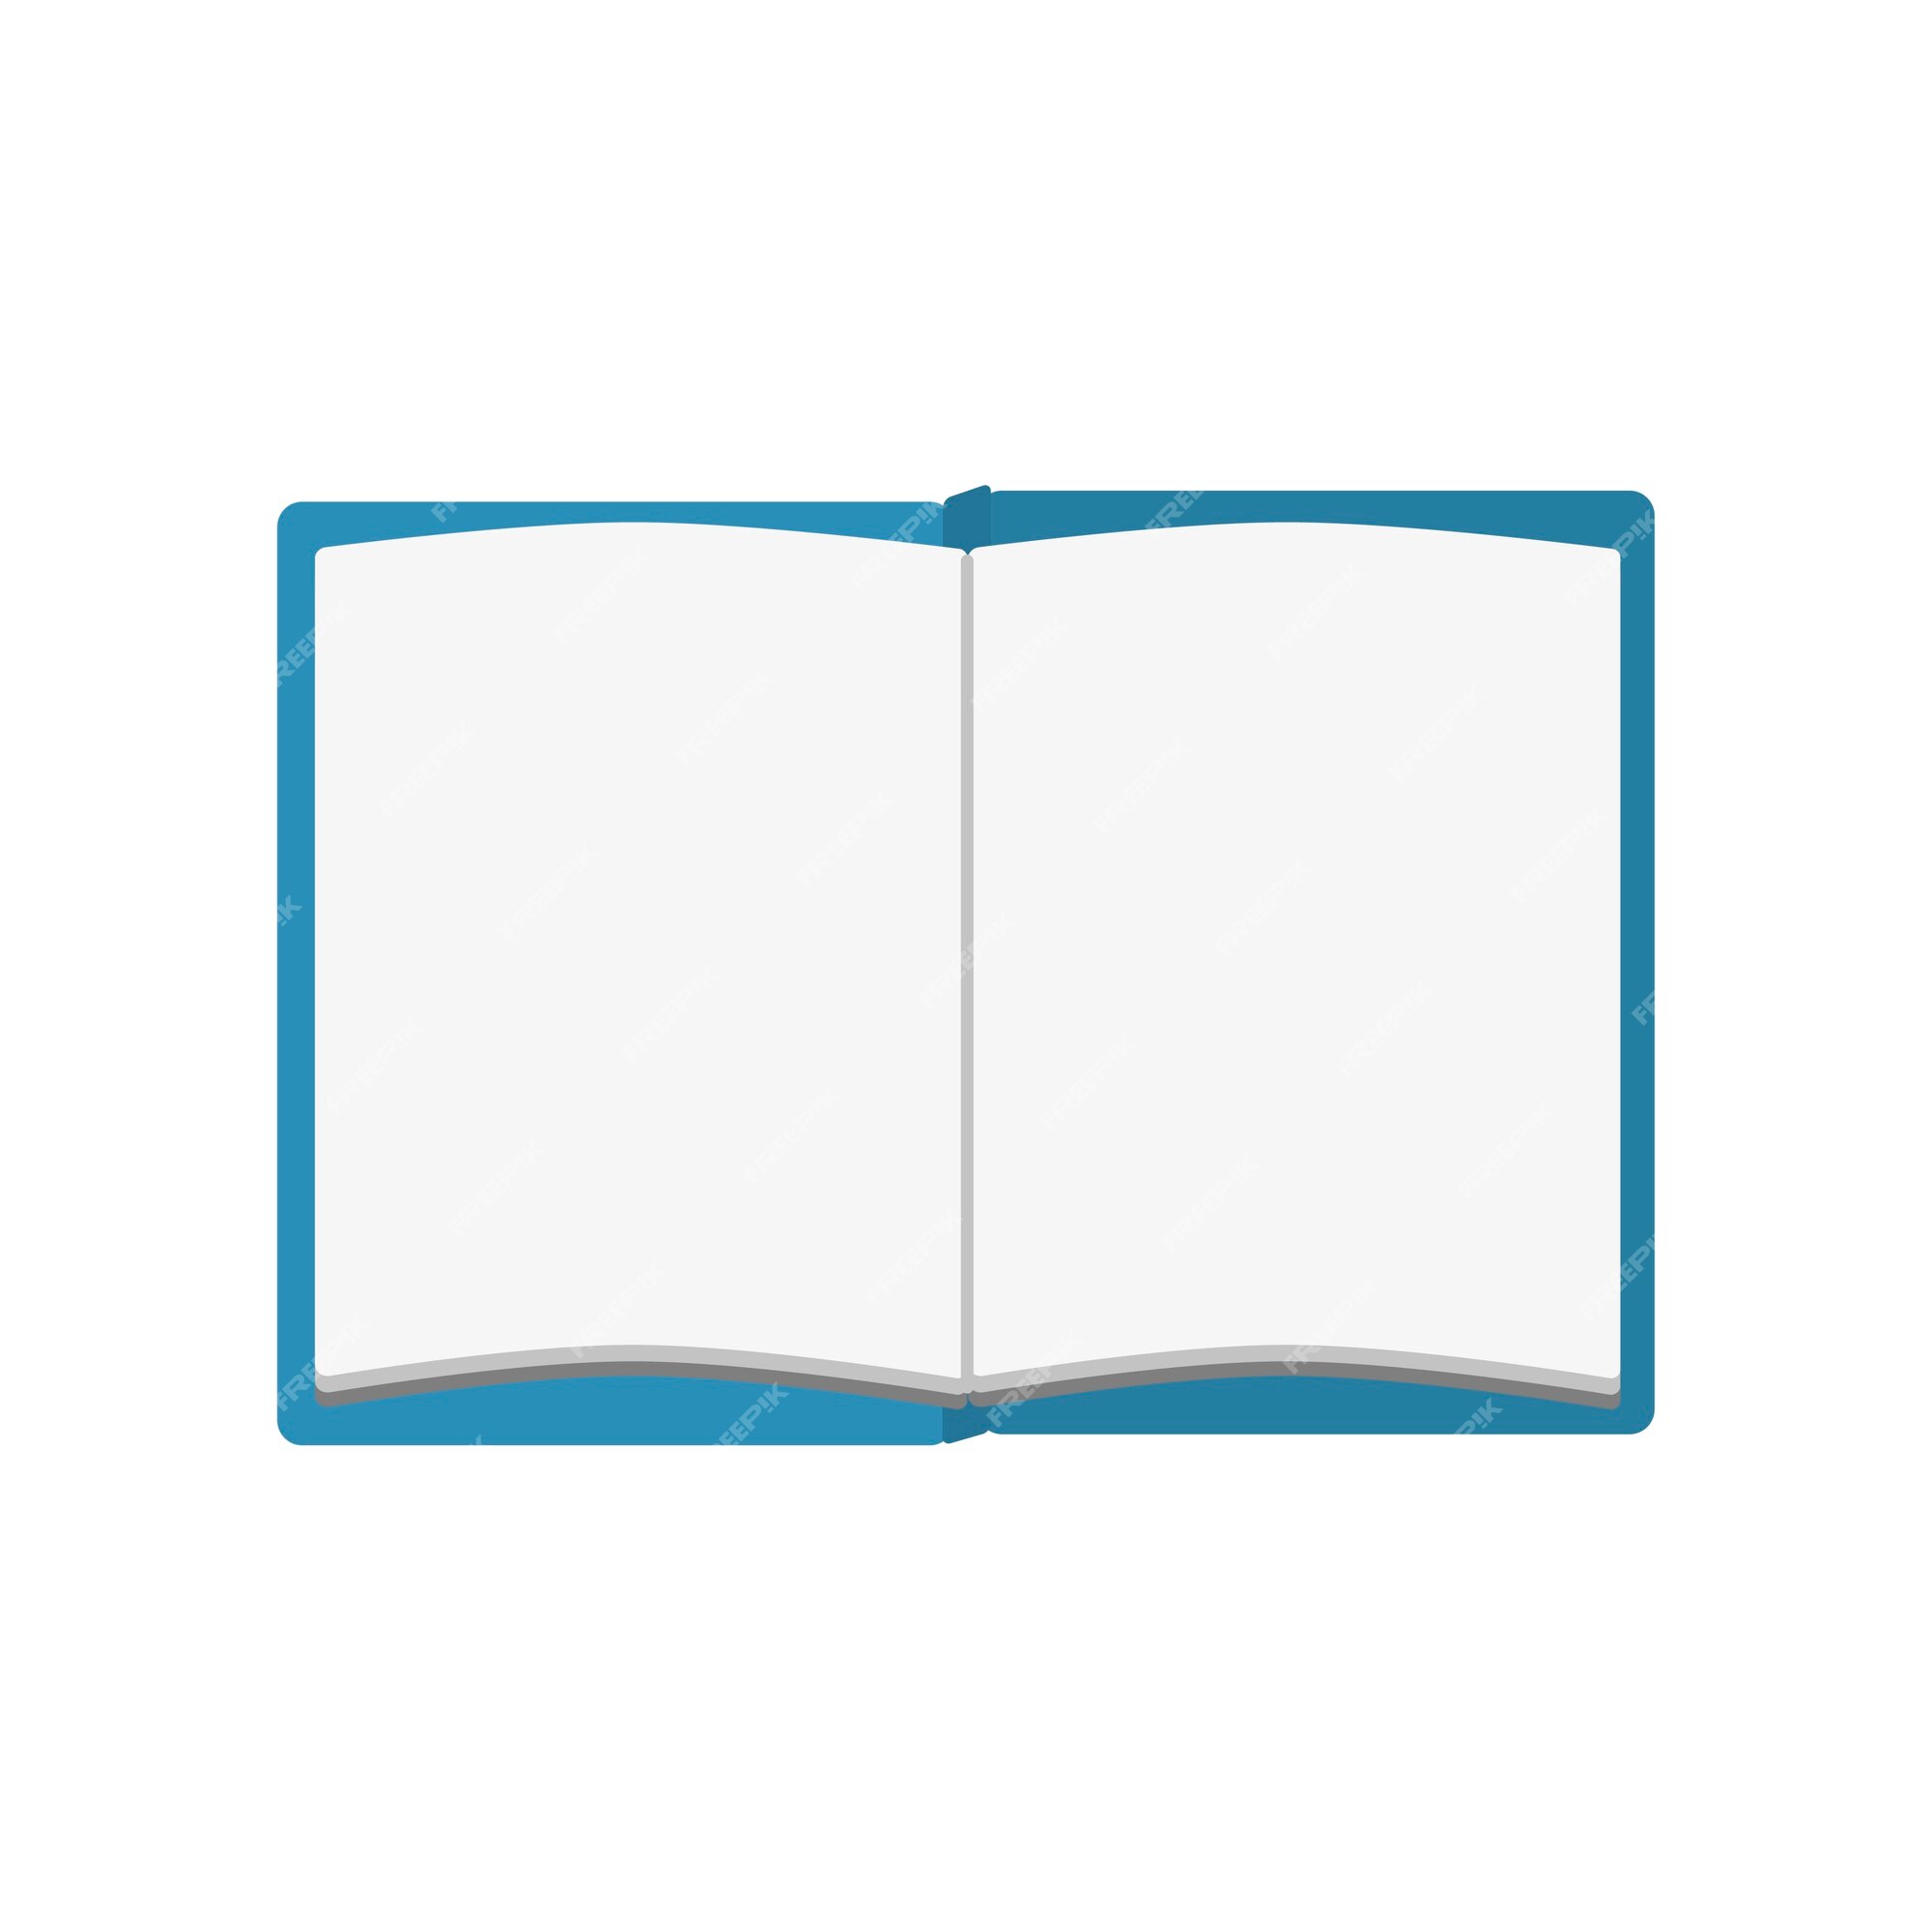 Free Vector | Illustration of notebook icon